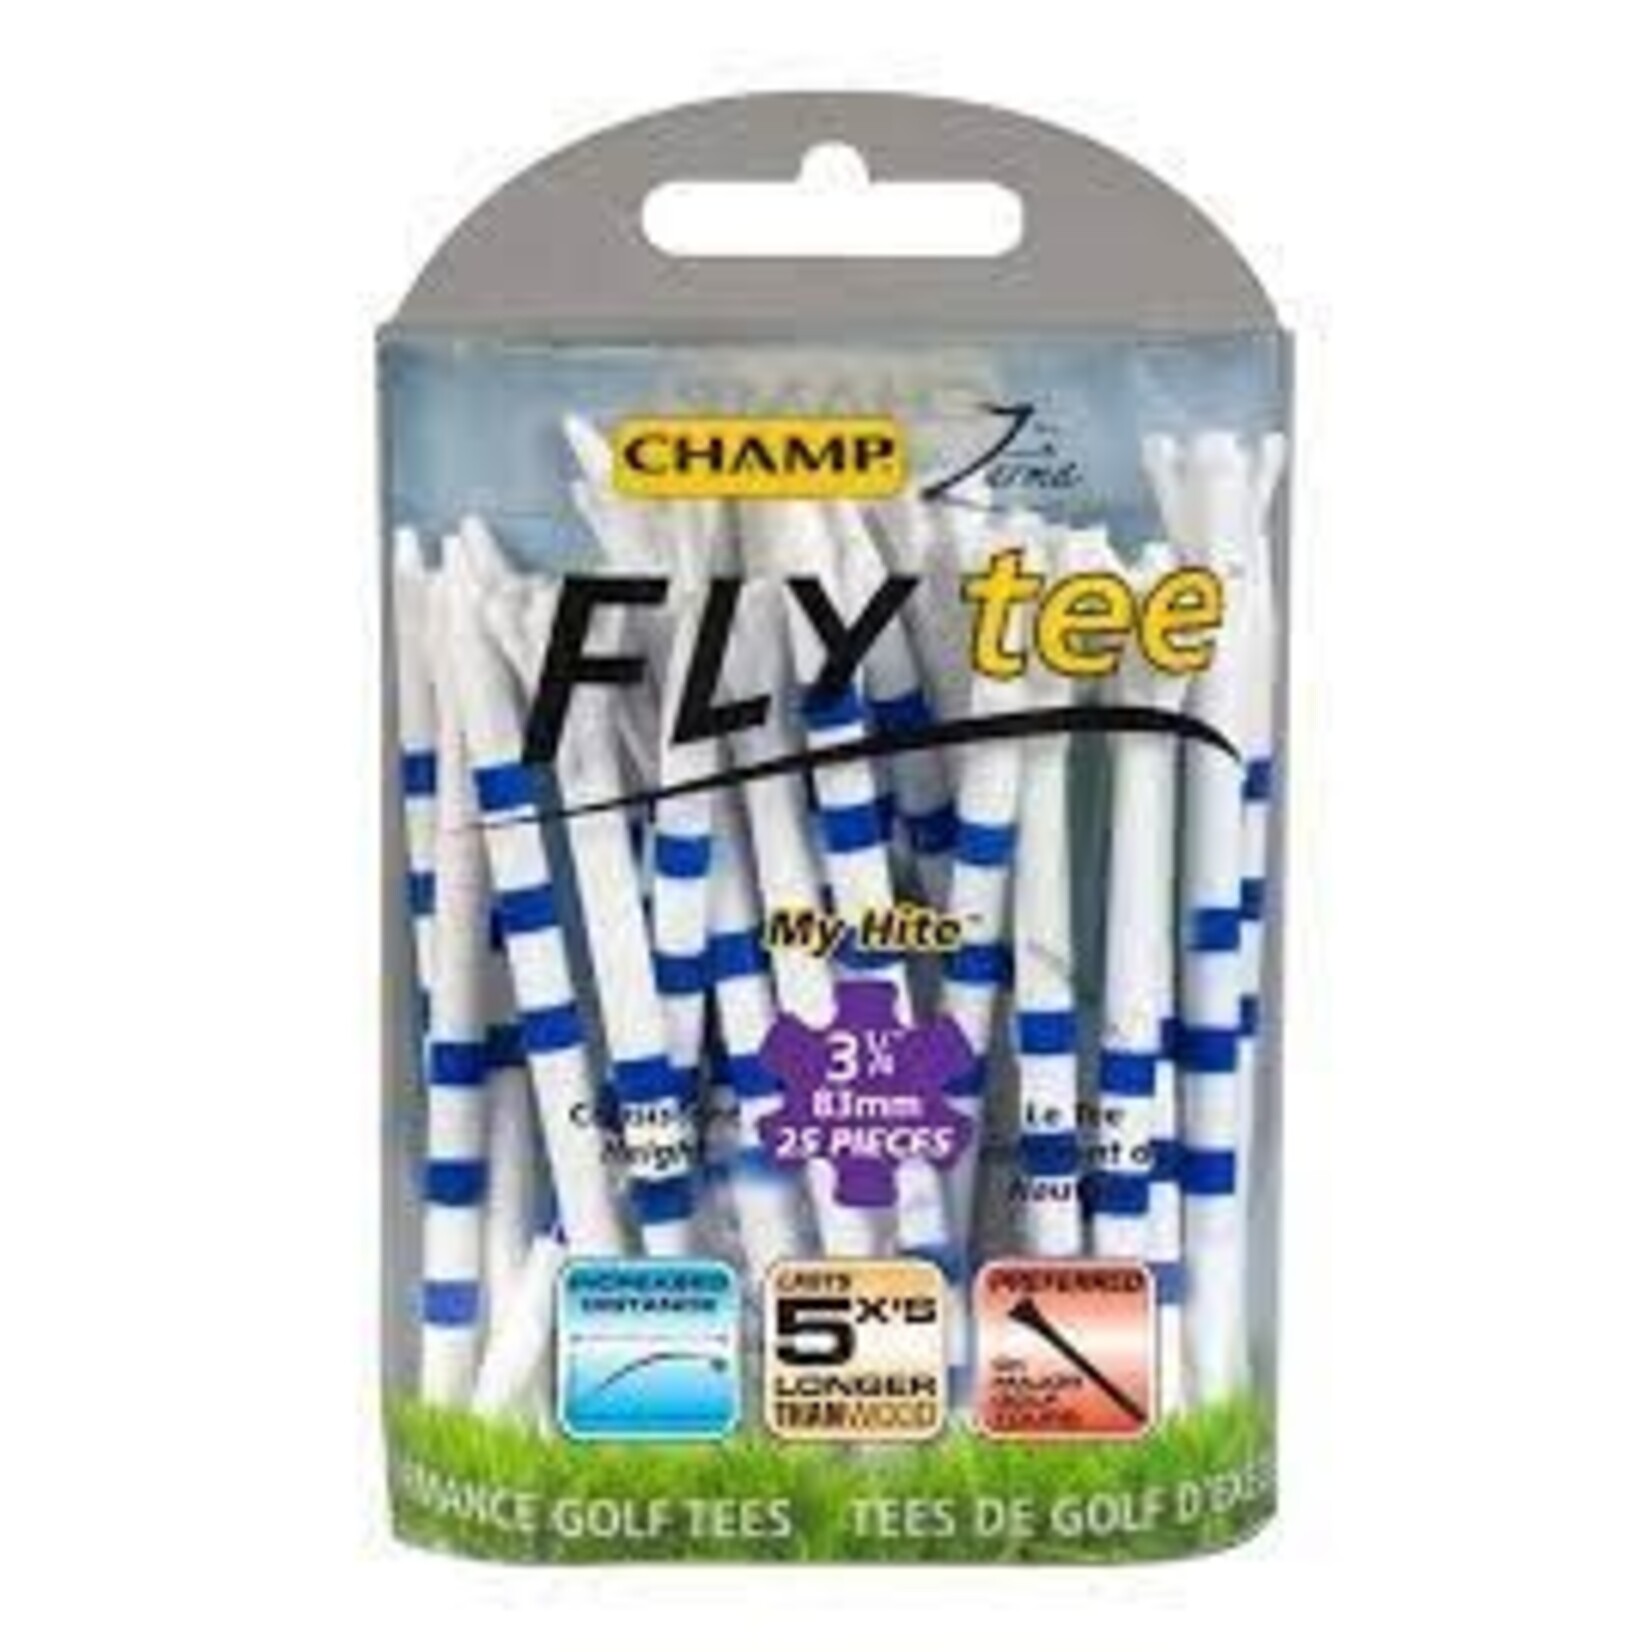 CHAMP Champ Fly Tee 3 1/4" Plastic - 25 pack